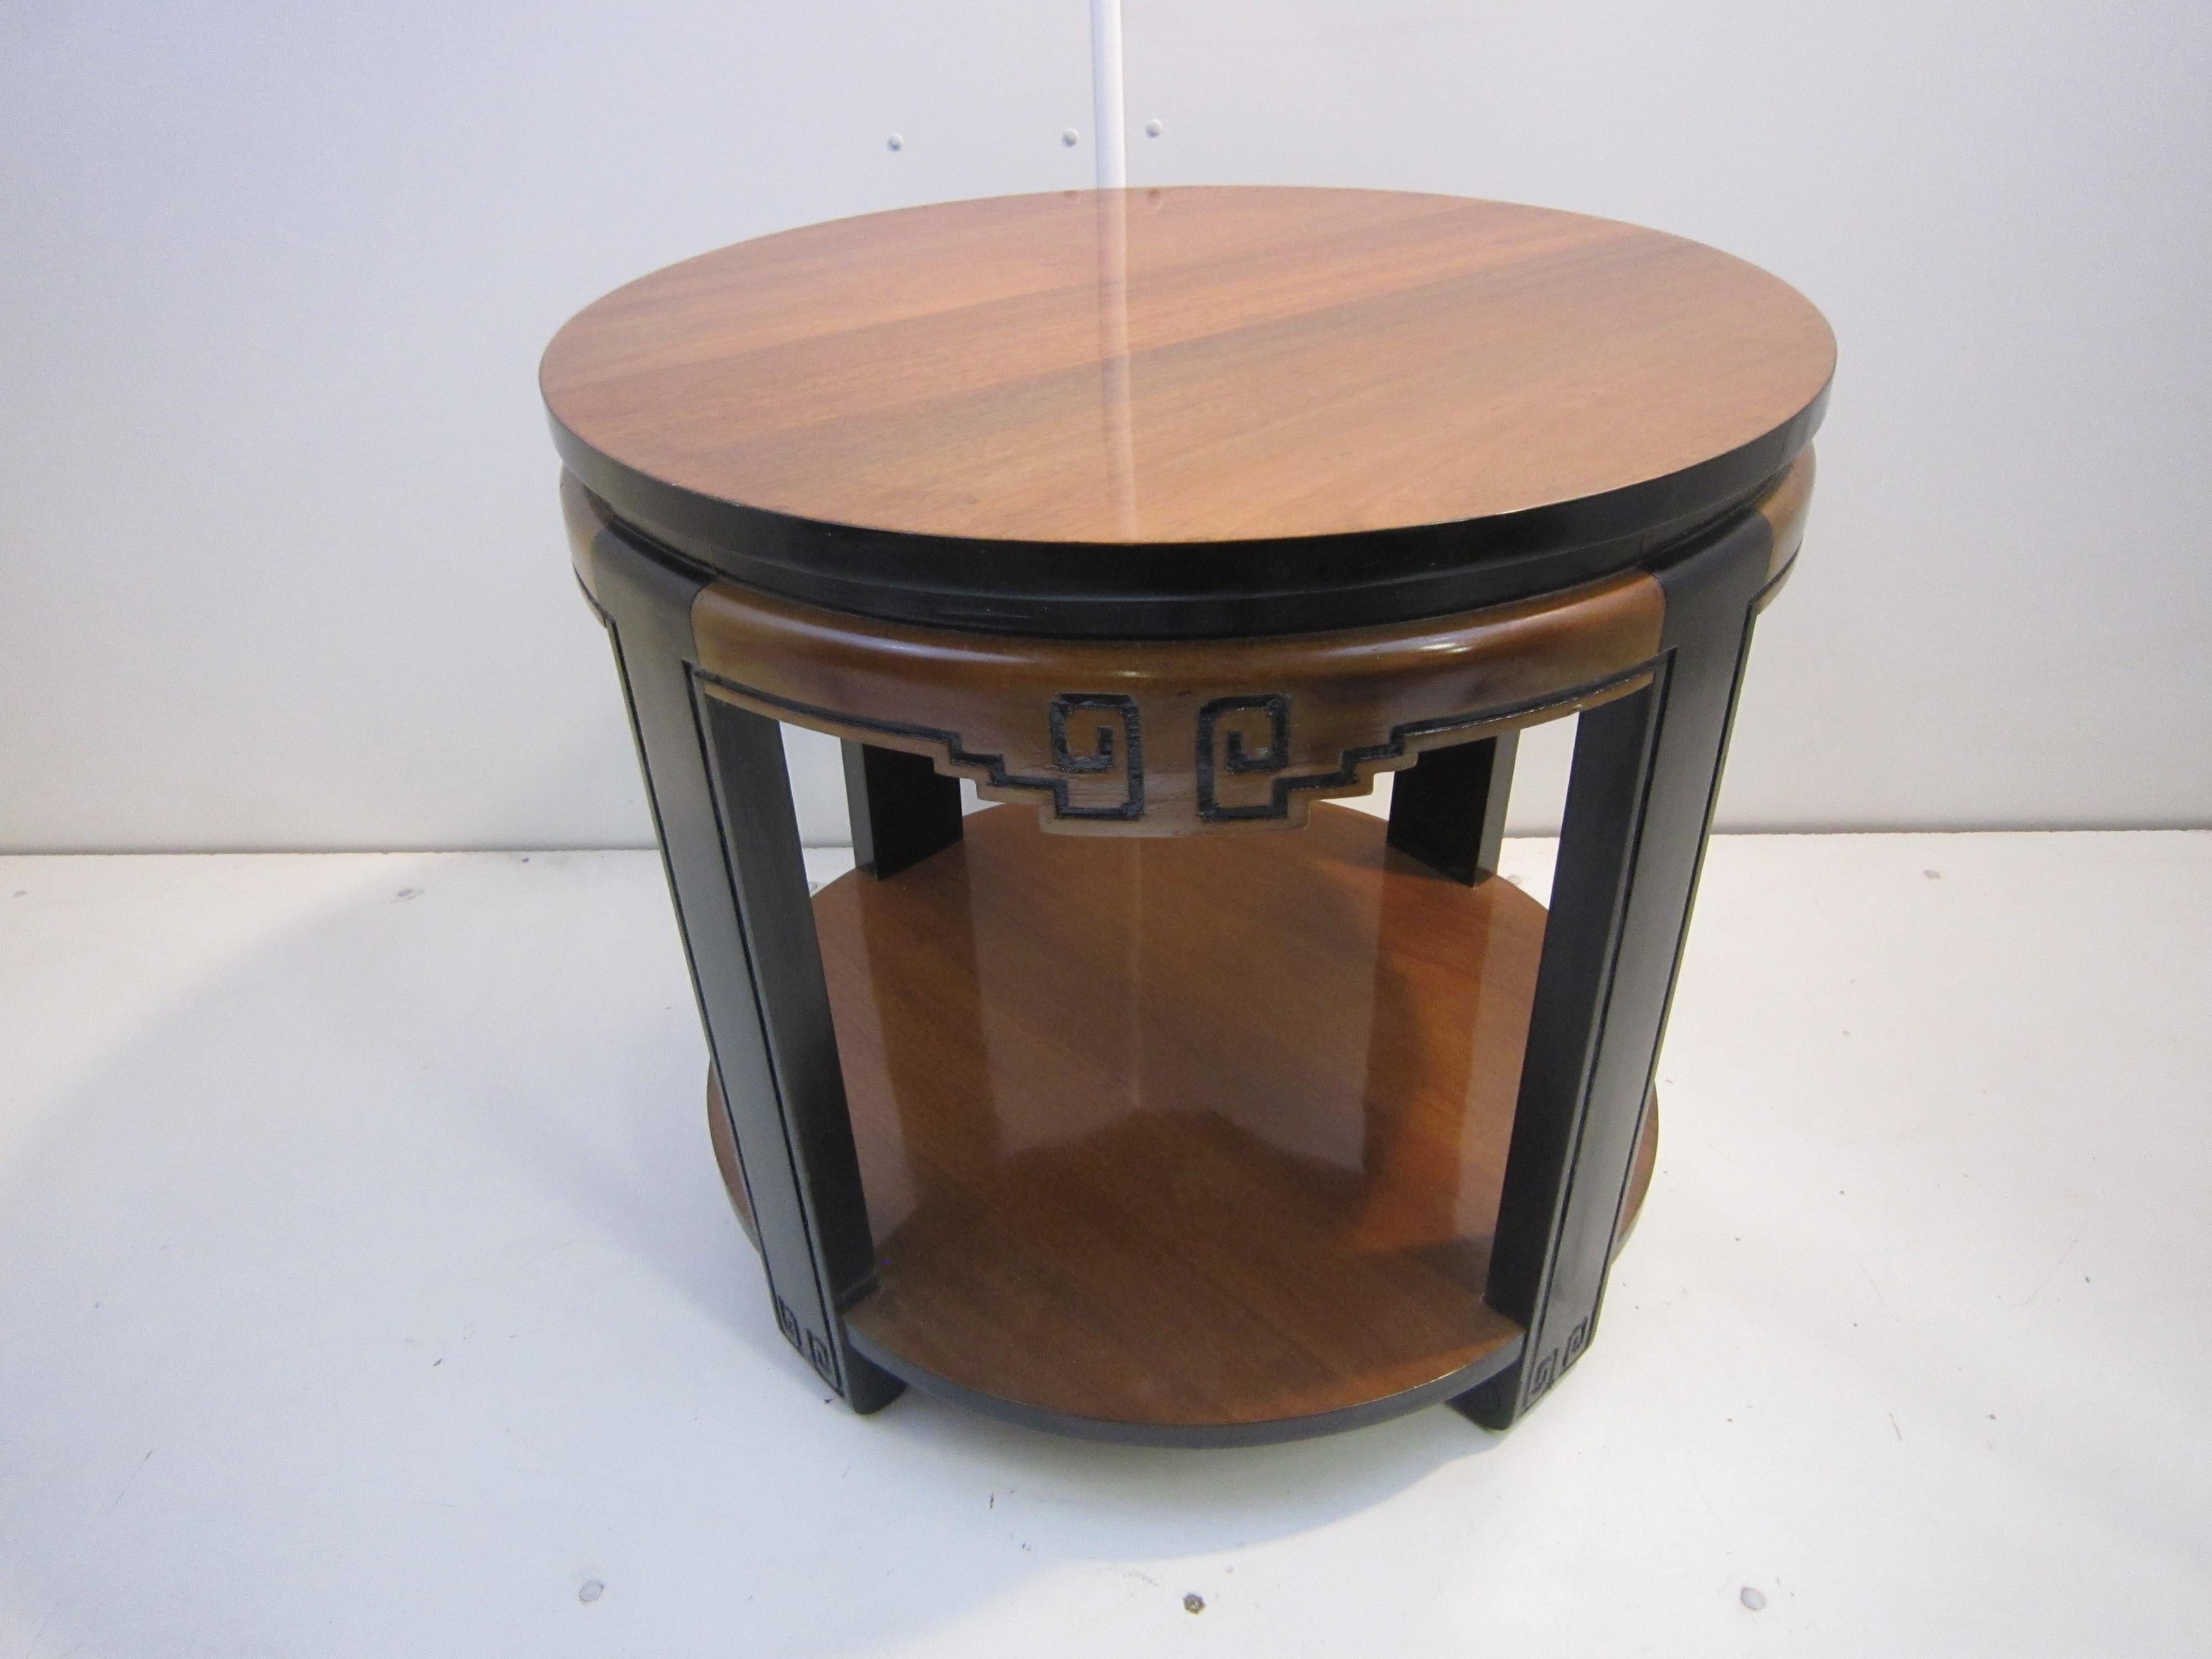 Original Art Deco Two-Tone Circular Table with Chinoiserie Design For Sale 4